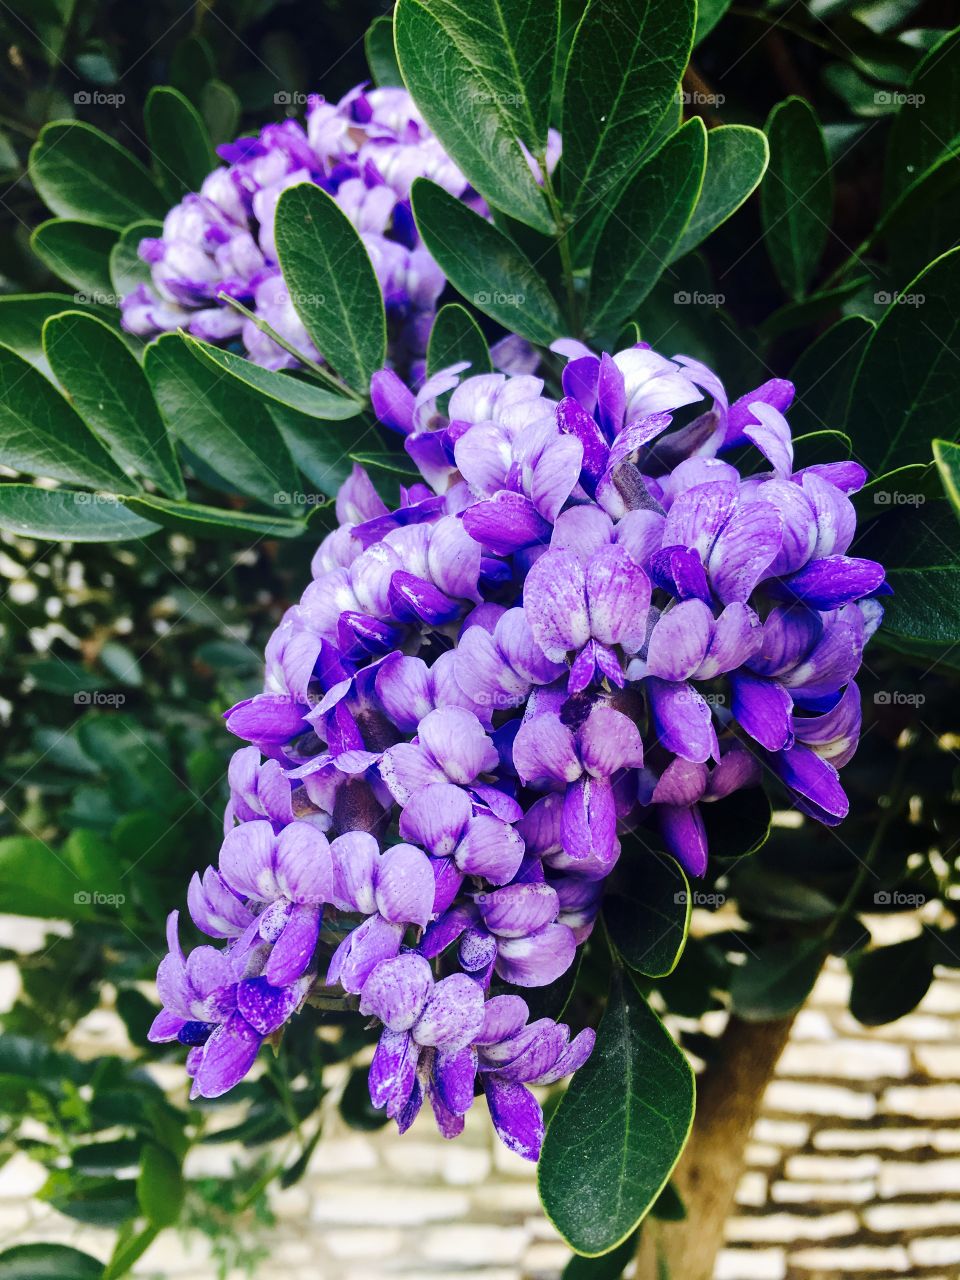 Texas Mountain Laurel first bloom of spring.